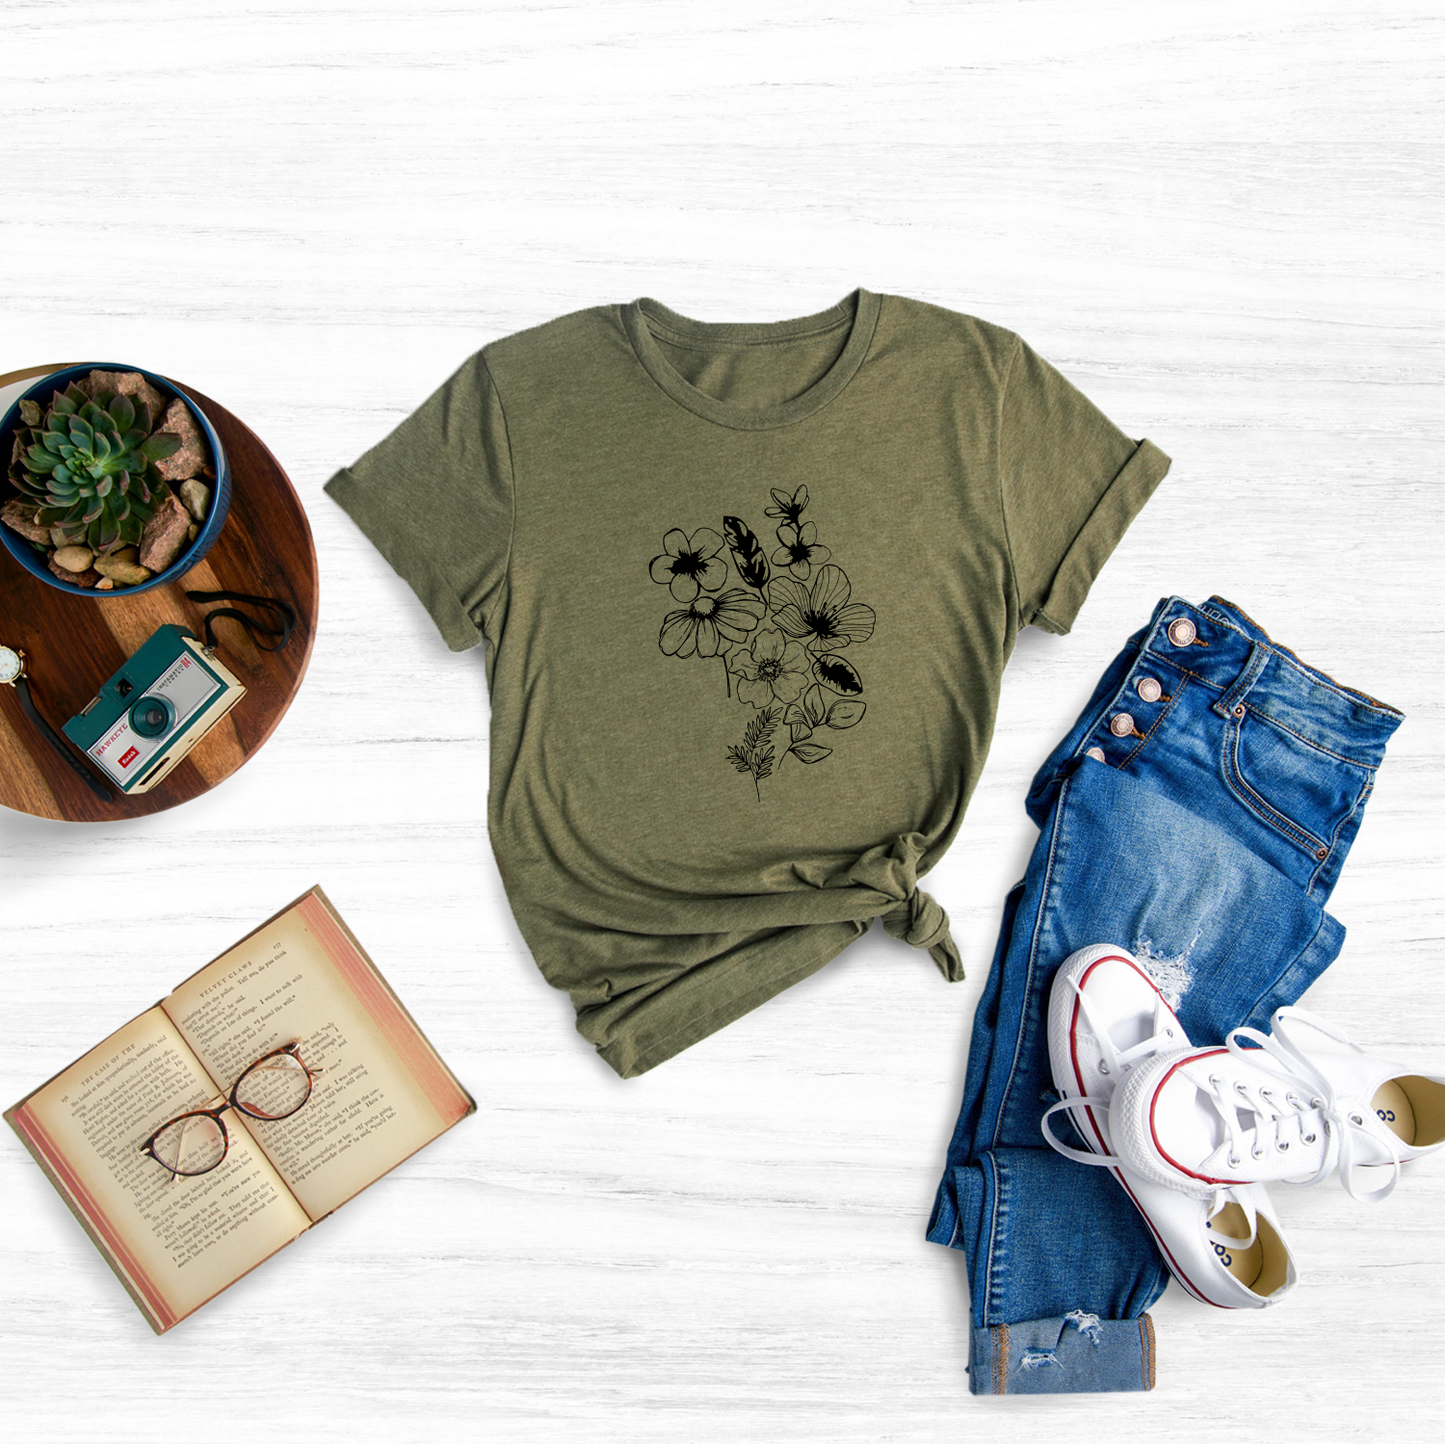 Celebrate the simple joys of life with this unique and eye-catching "Wildflower" t-shirt.